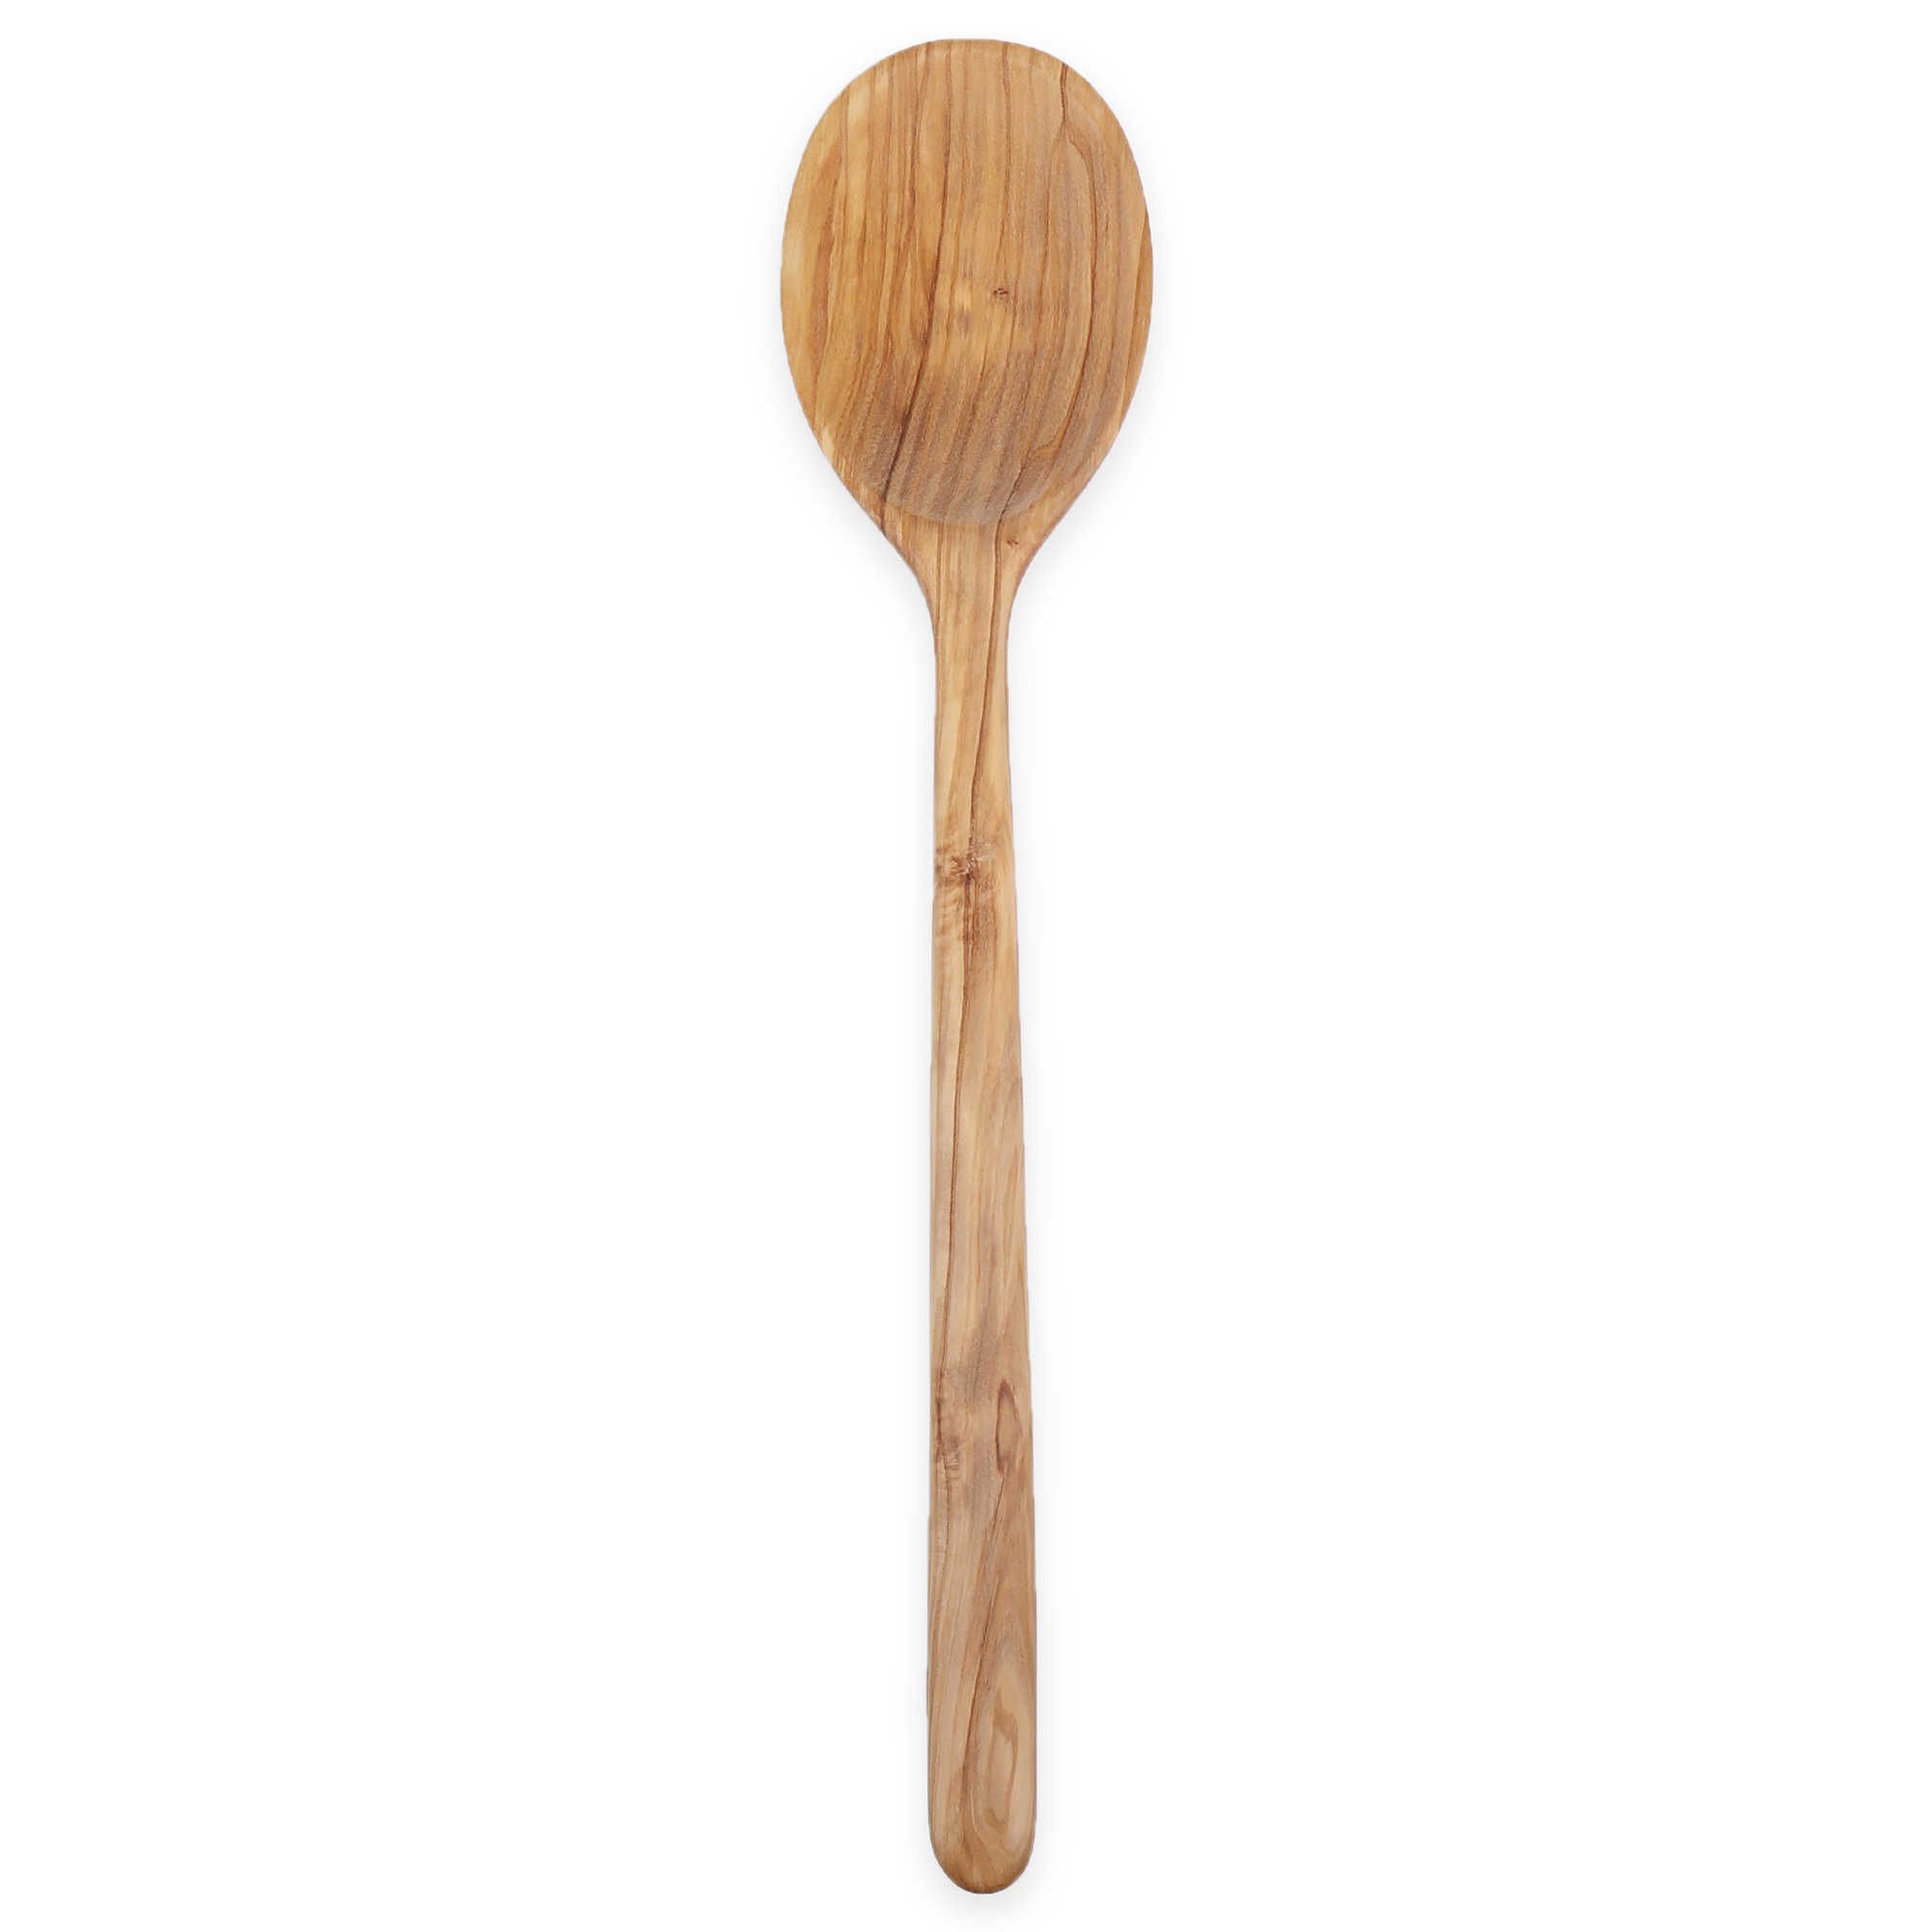 Artisanal Kitchen Supply™ Olive Wood 13-1/2-Inch Spoon | Bed Bath & Beyond